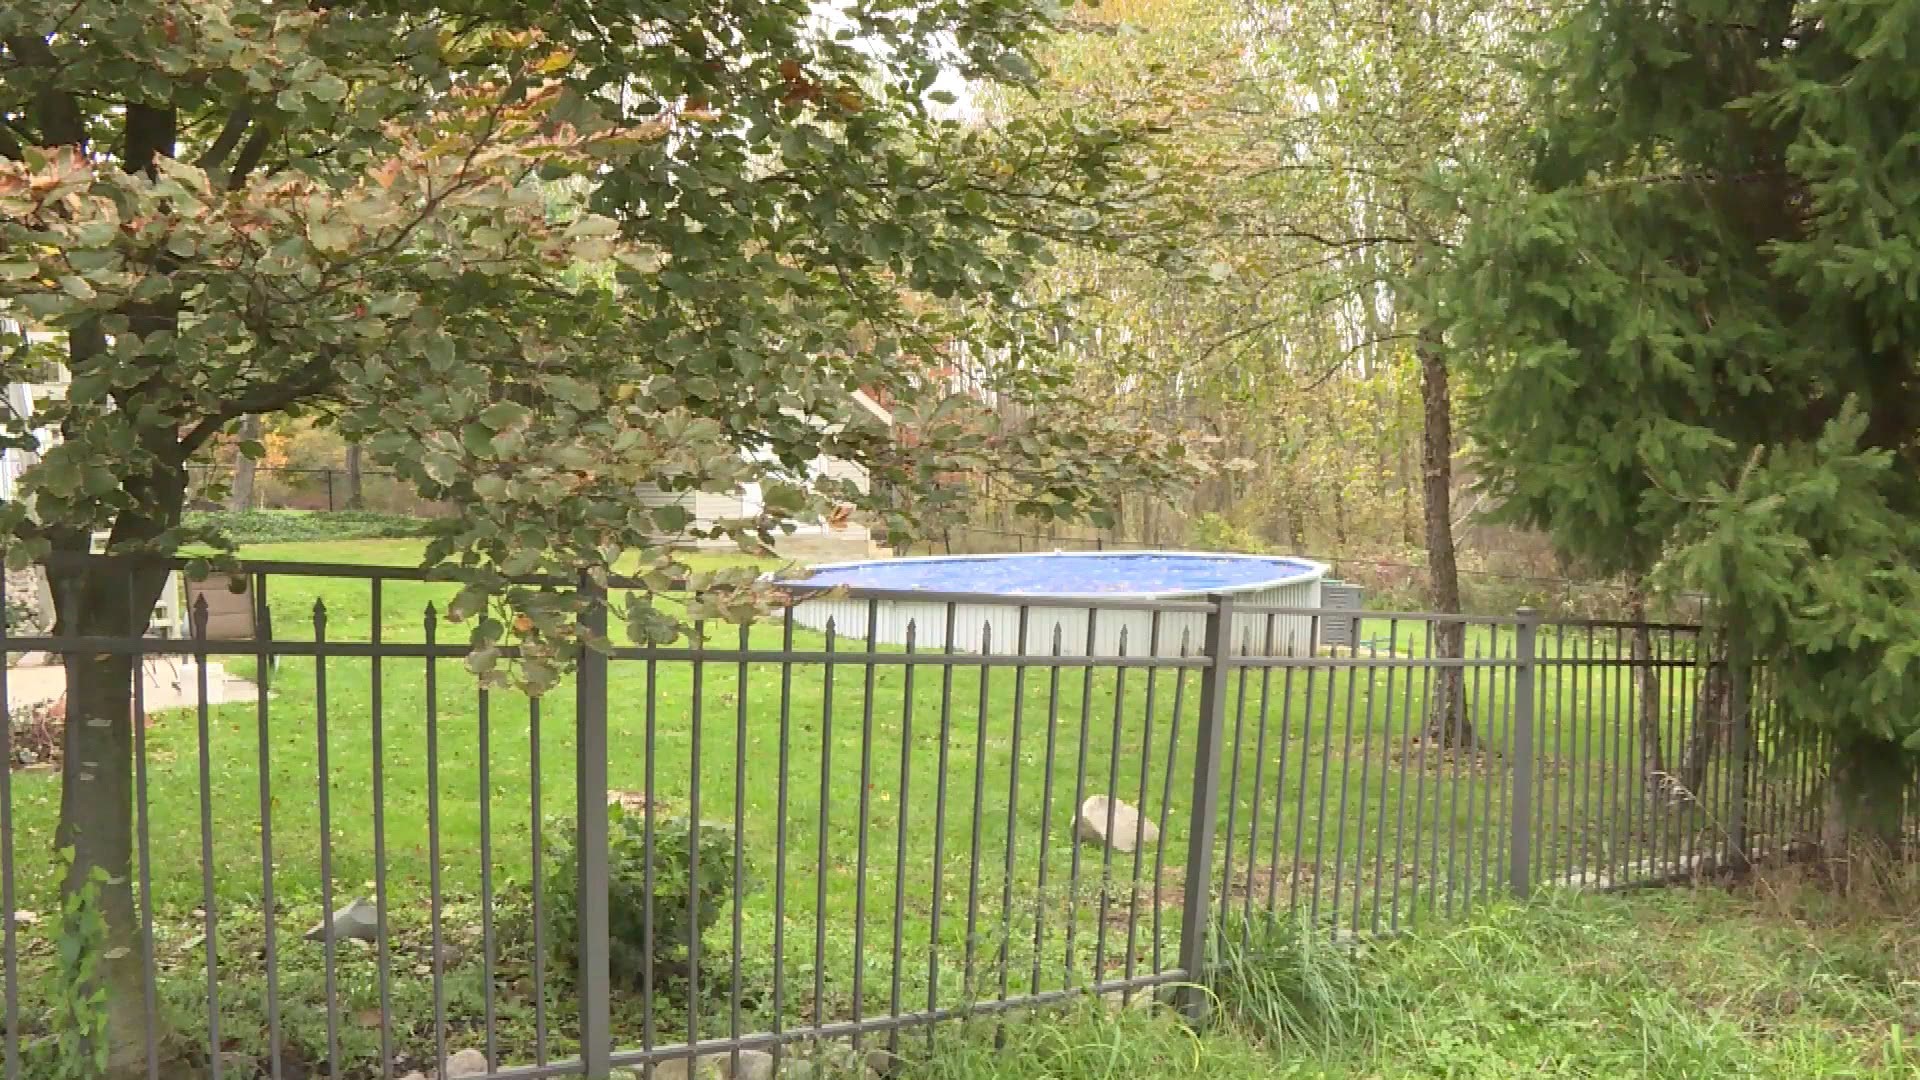 A teen with autism who drowned in his family’s backyard swimming pool was left unsupervised outside with his arms bound. His father Timothy Koets is facing charges.